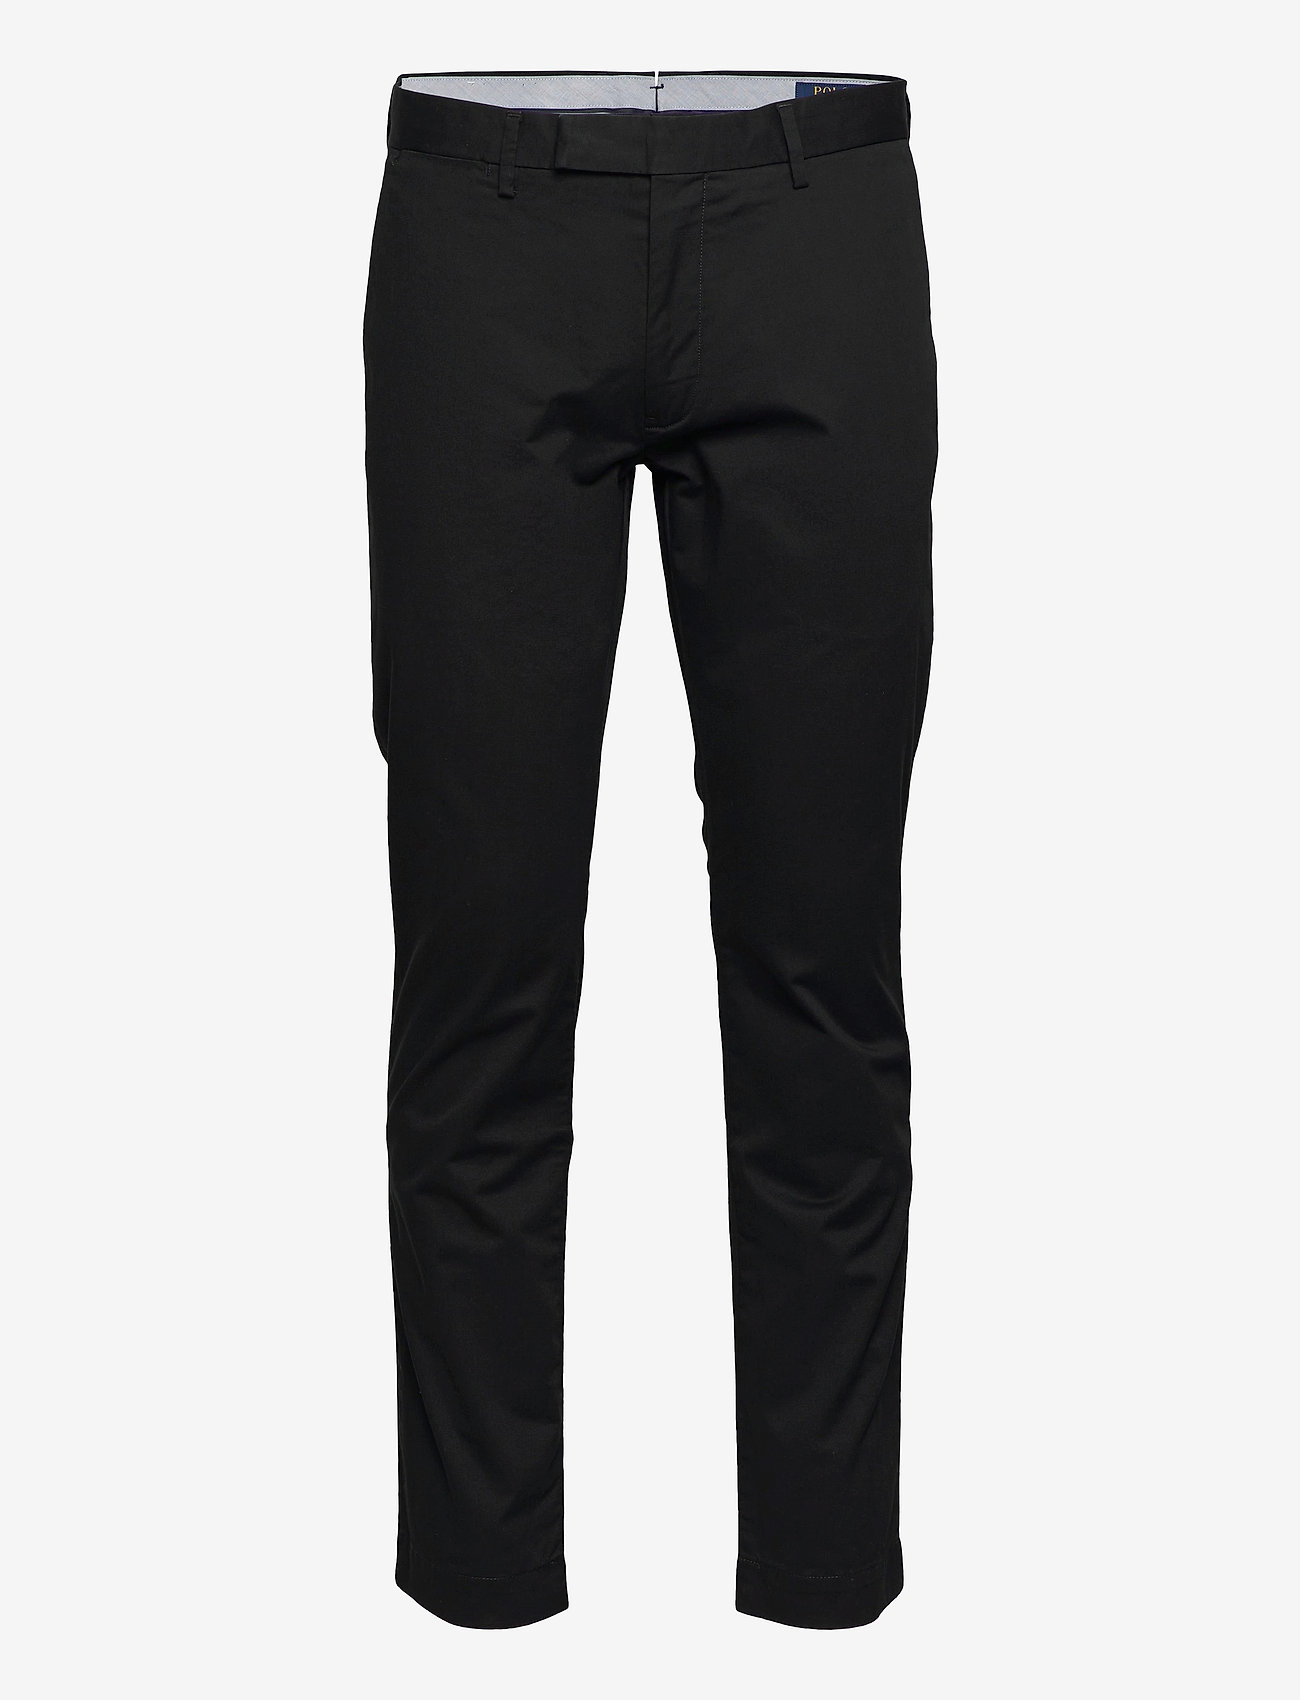 Polo Ralph Lauren - Stretch Slim Fit Chino Pant - chinos - polo black - 0